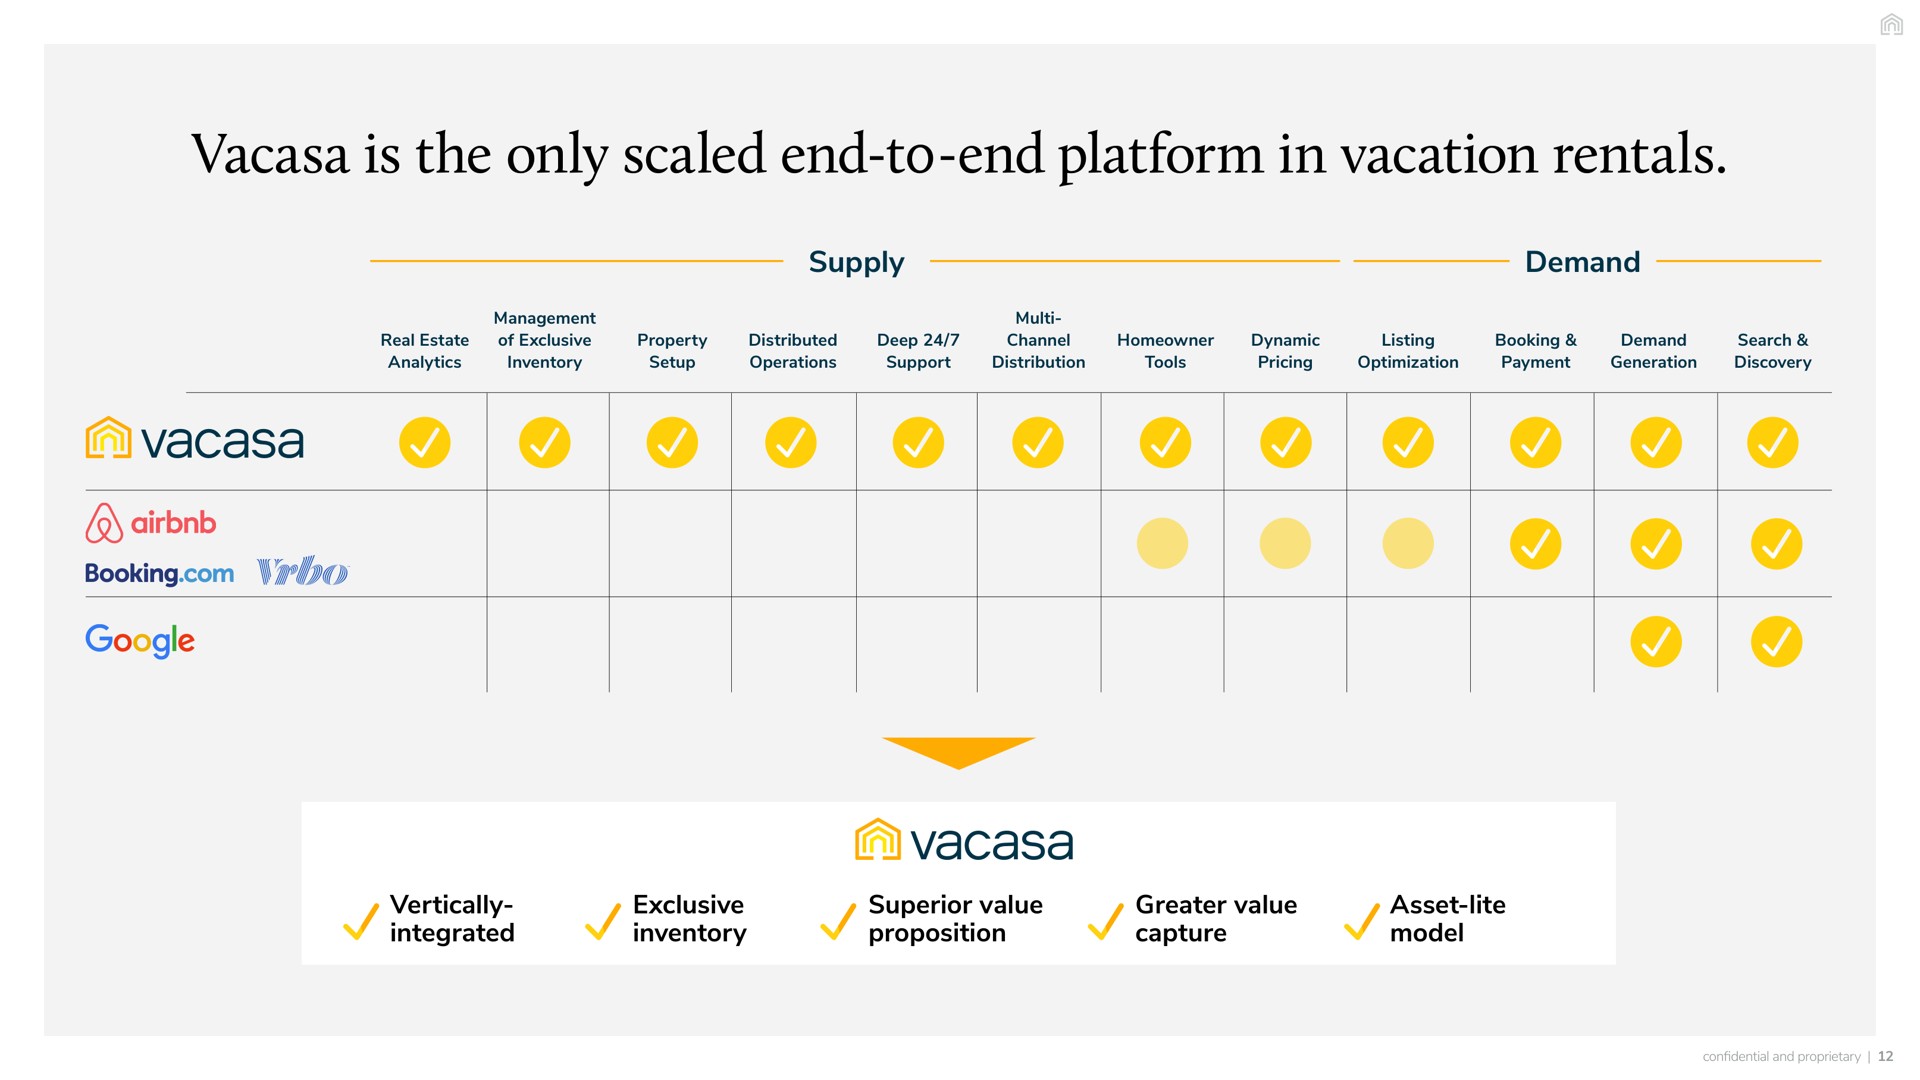 is the only scaled end end platform in vacation rentals end to end supply demand real estate analytics management of exclusive inventory property setup distributed operations deep support channel distribution homeowner tools dynamic pricing listing optimization booking payment demand generation search discovery booking vertically integrated exclusive inventory superior value proposition greater value capture asset lite model | Vacasa